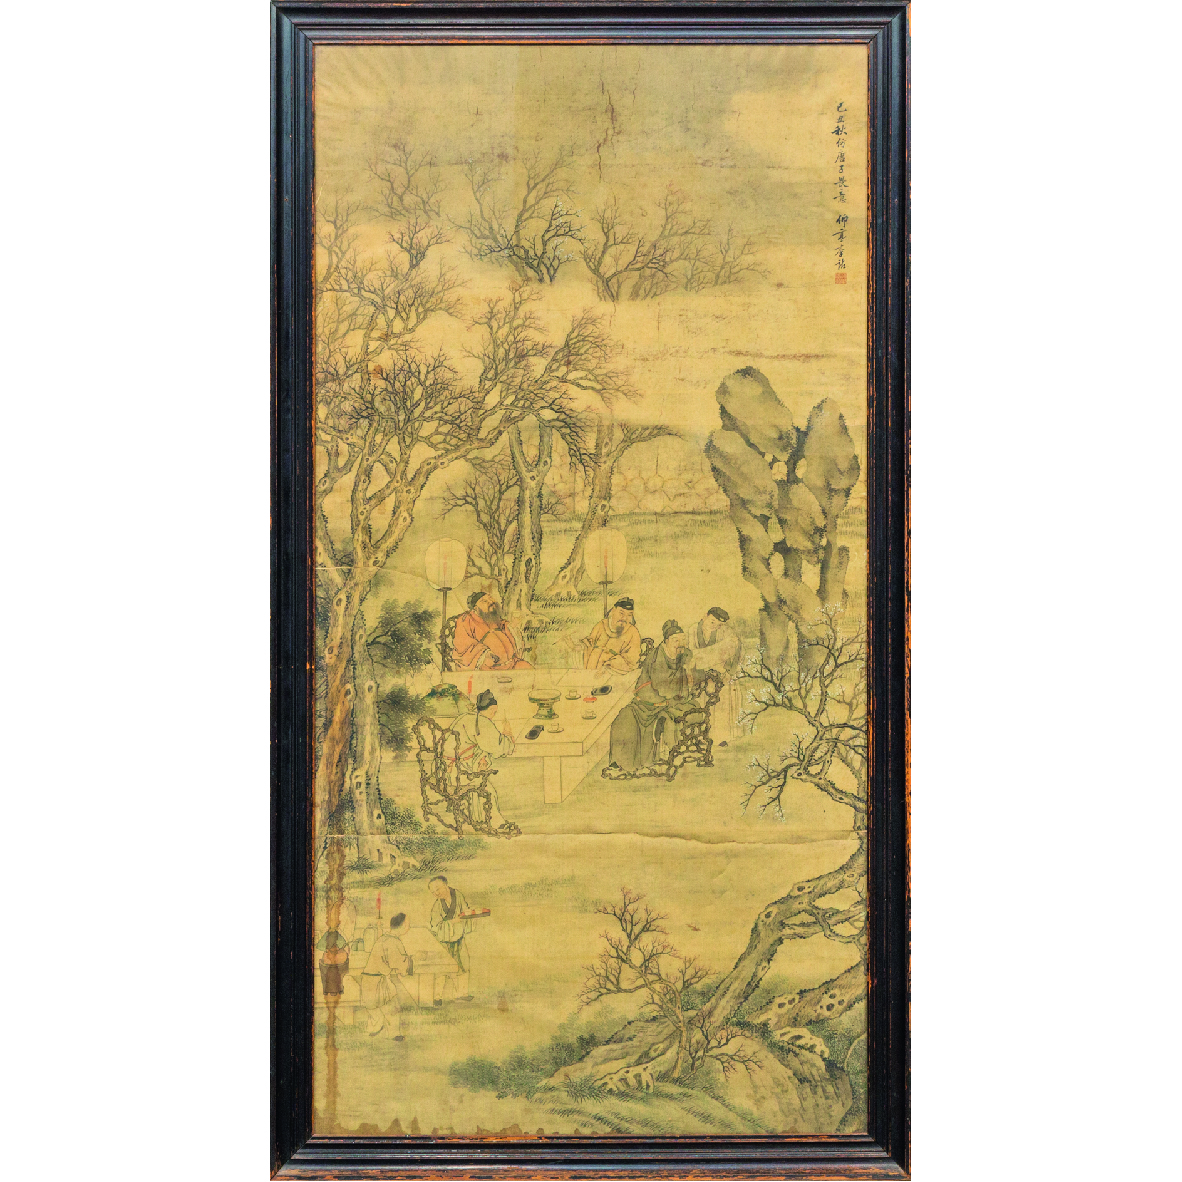 Hand-painted Chinese artwork on silk | Flanders Auctions